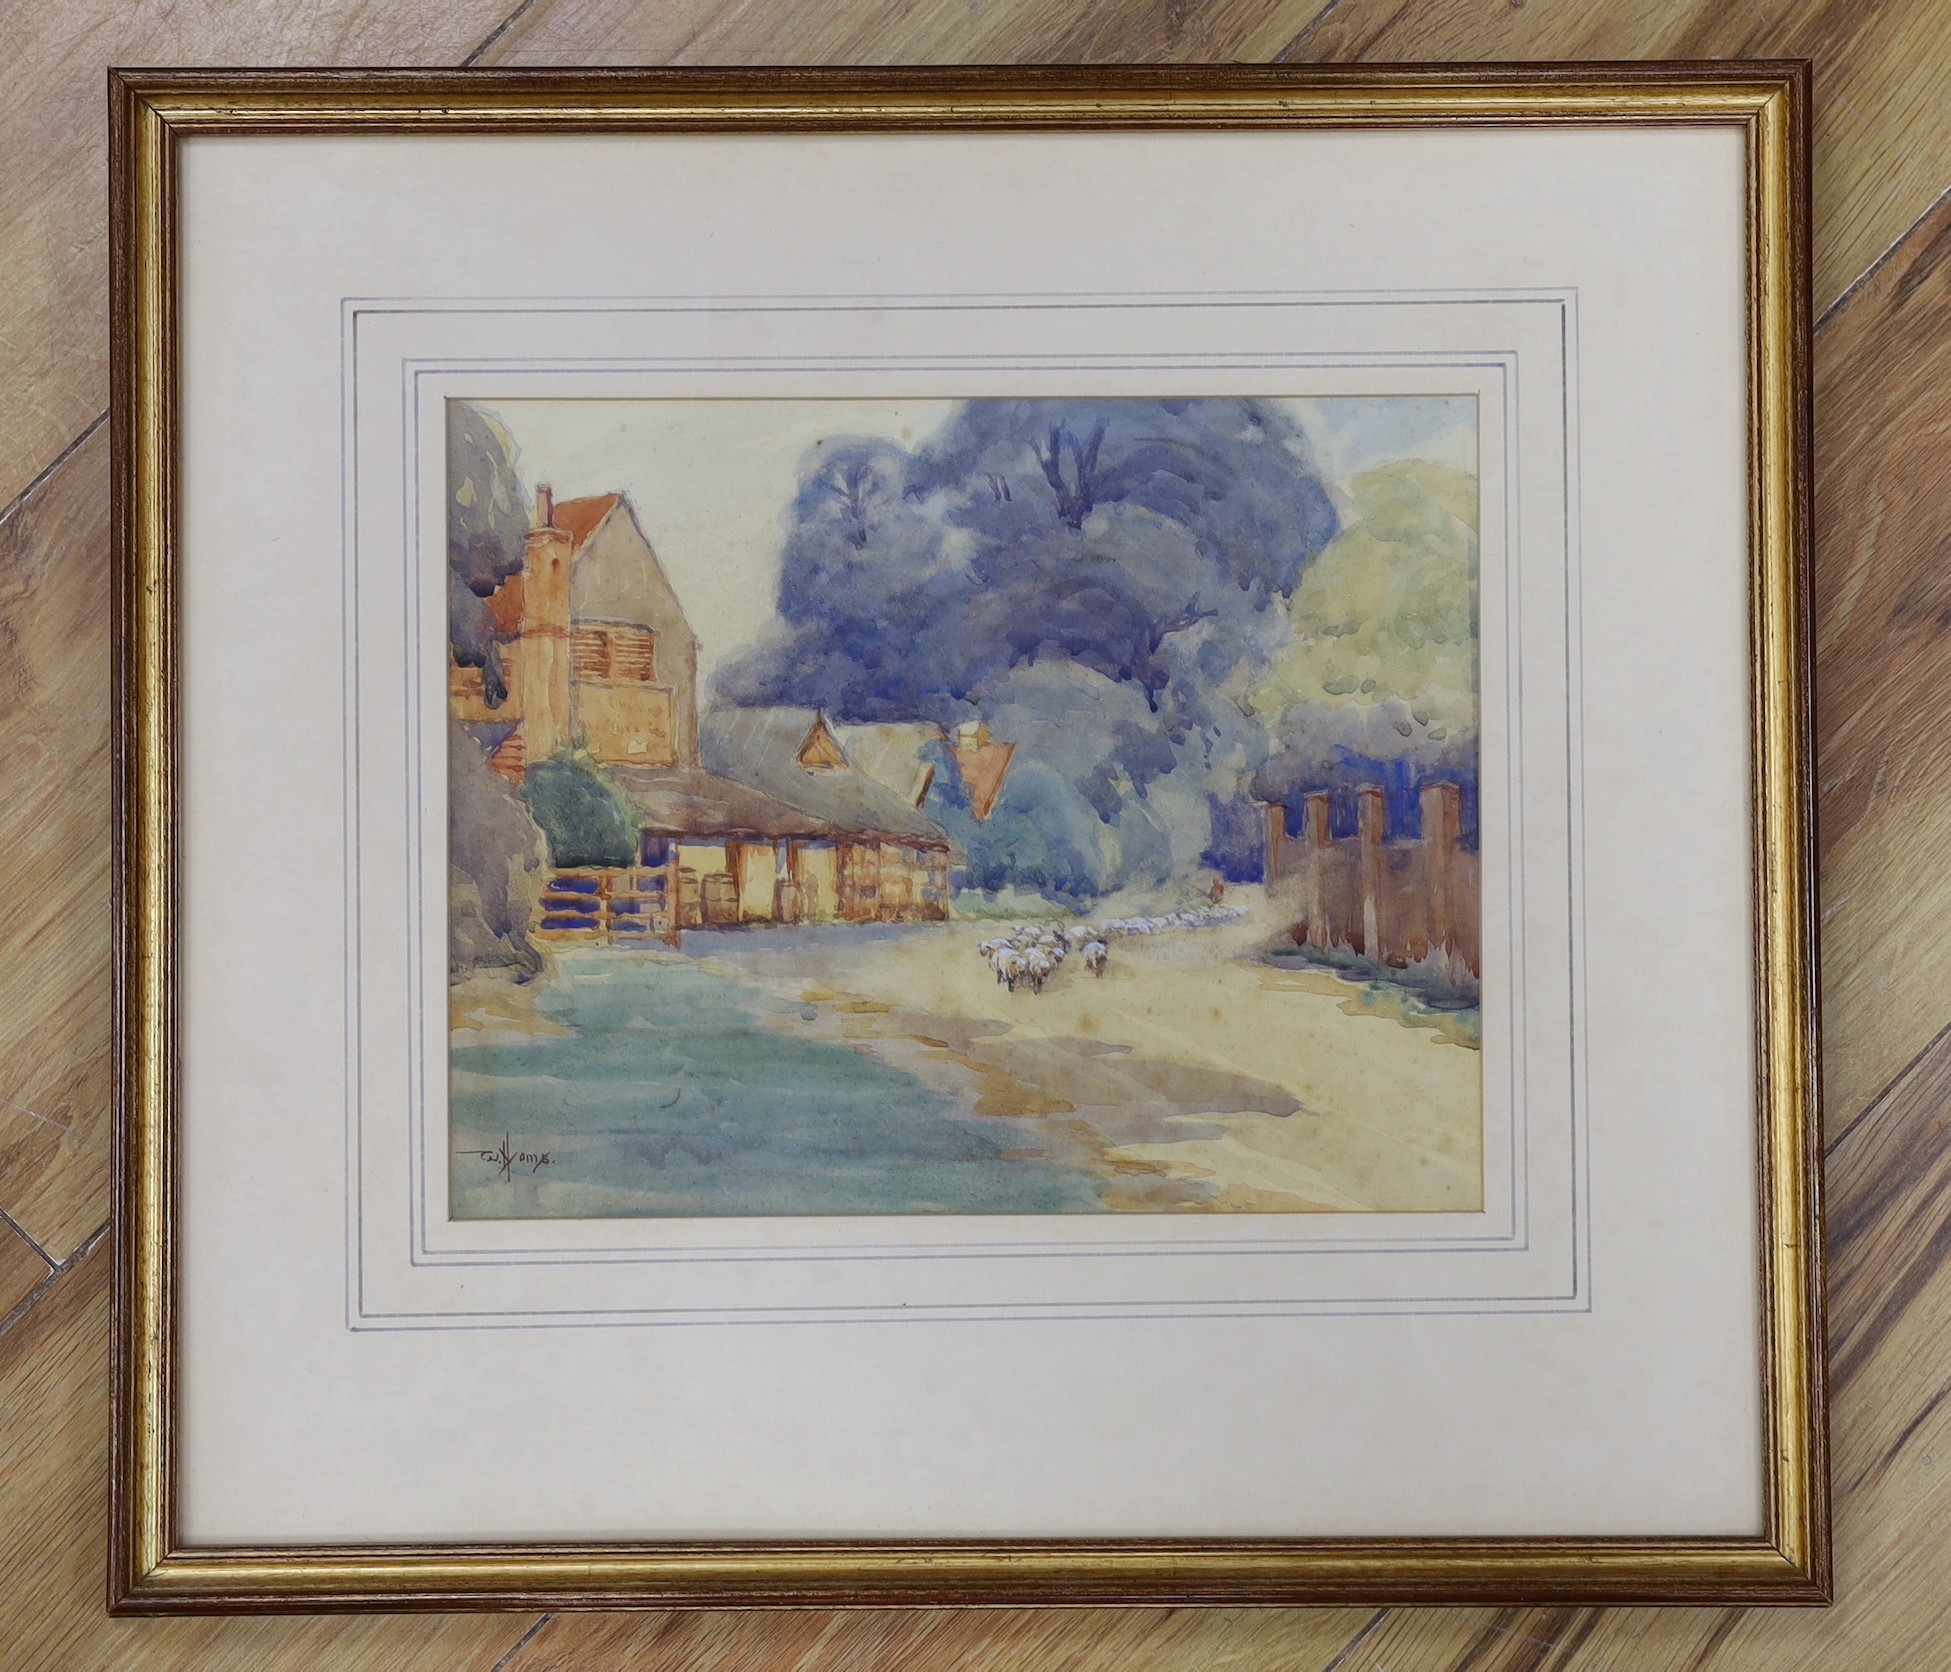 William Hyams (1878-1952), watercolour, Shepherd and flock on a lane, signed, 22 x 28cm